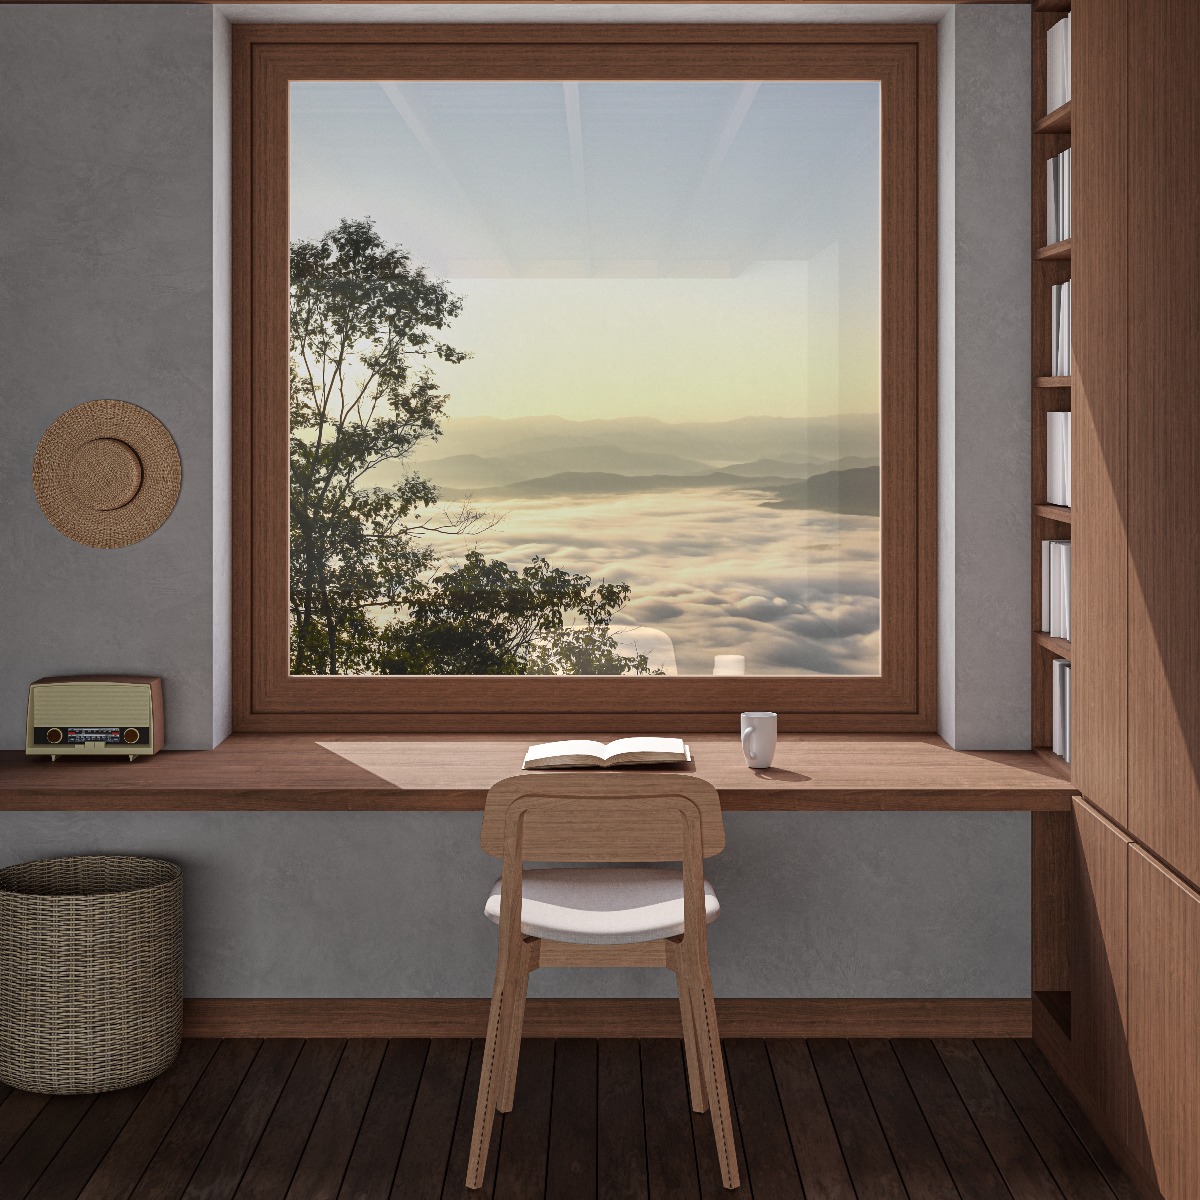 reading nook with window overlooking mountains and sea of fog. wooden floor, desk, chair, and window frame